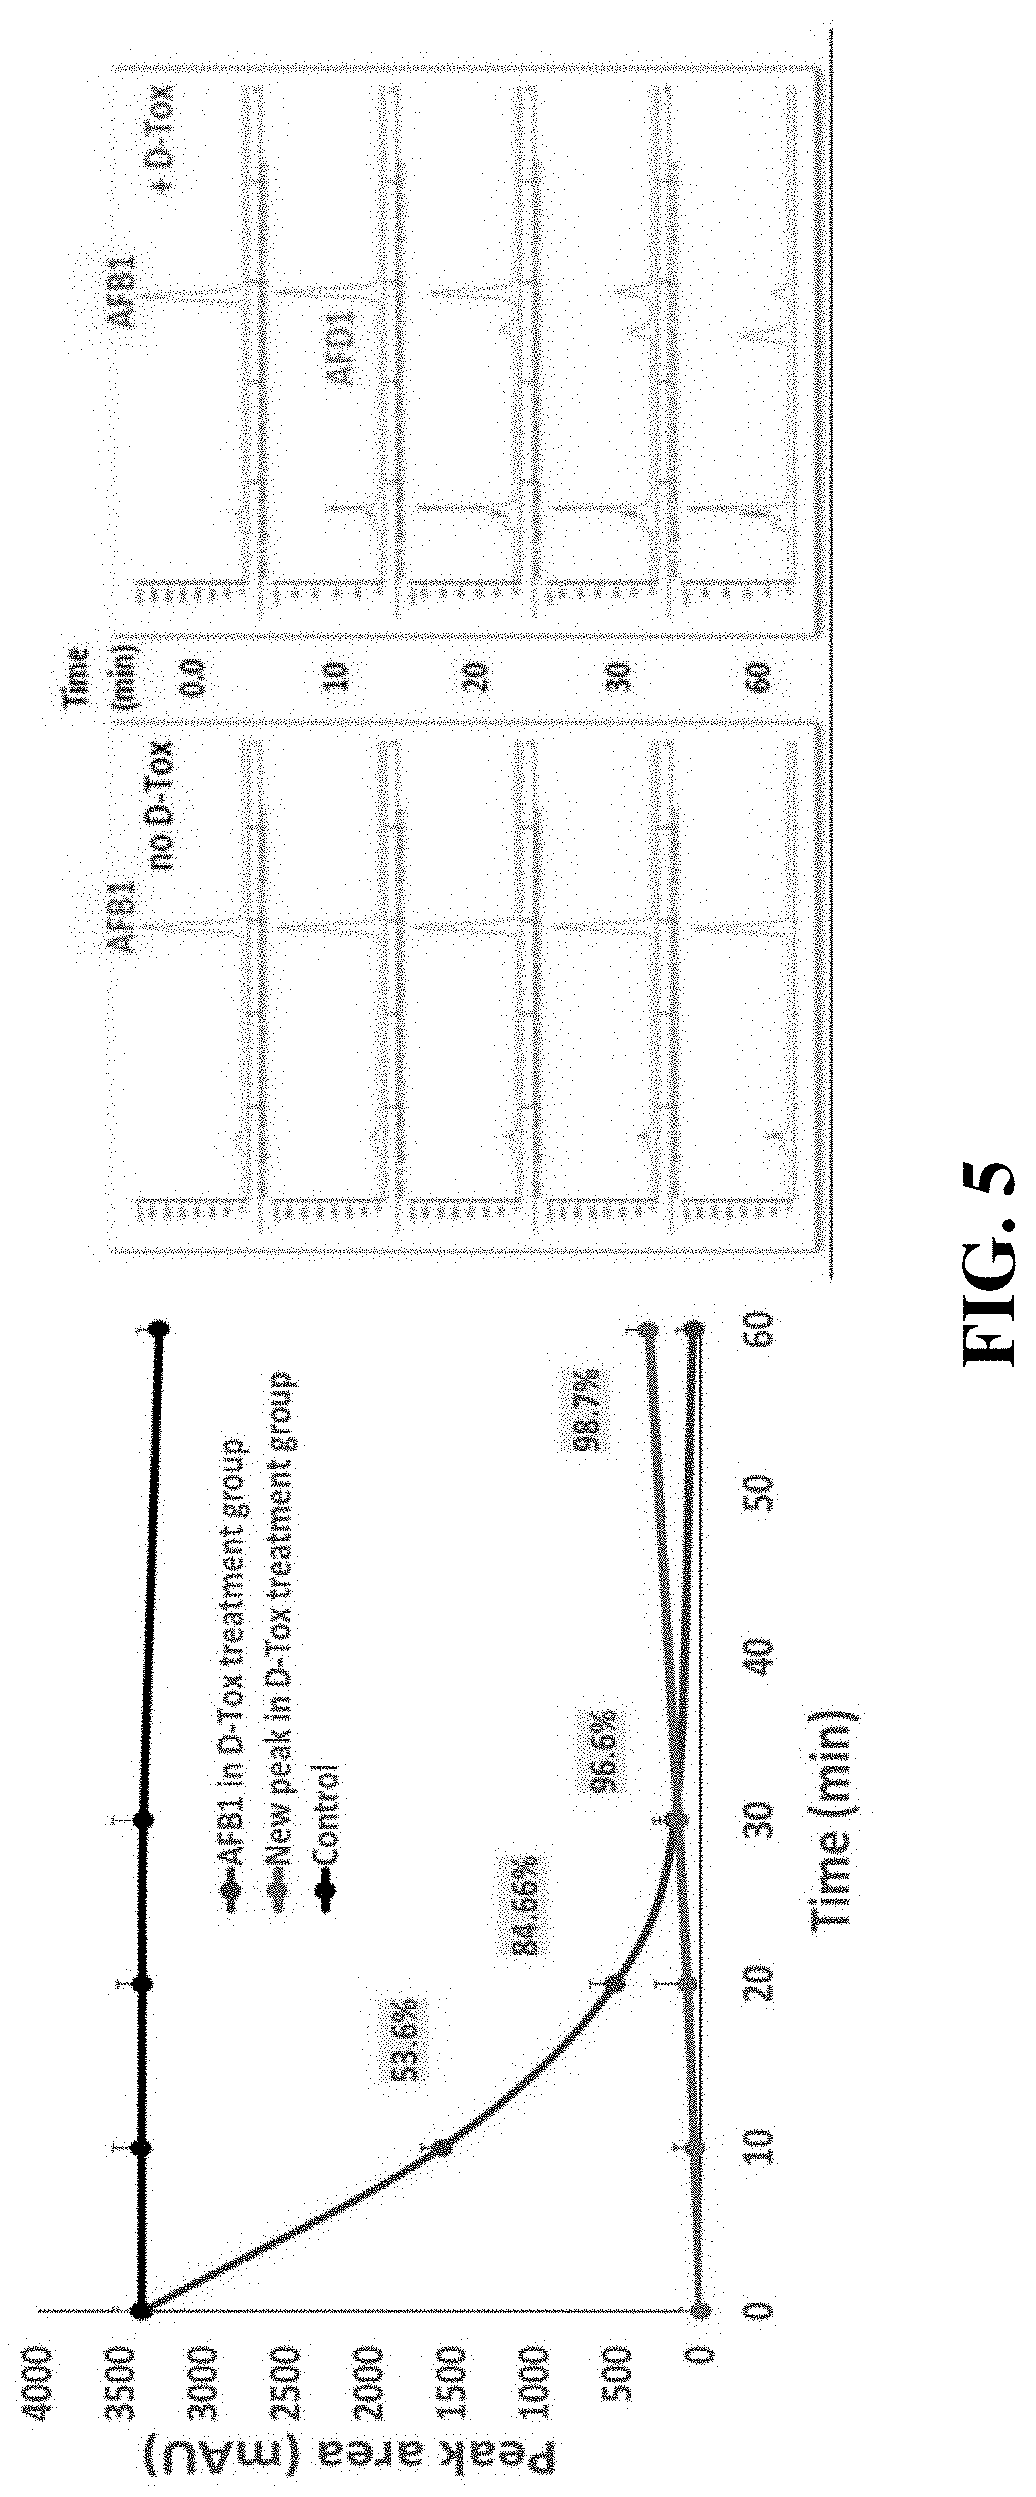 Composition for degradation of aflatoxin comprising aspergillus culture filtrate as effective component and uses thereof